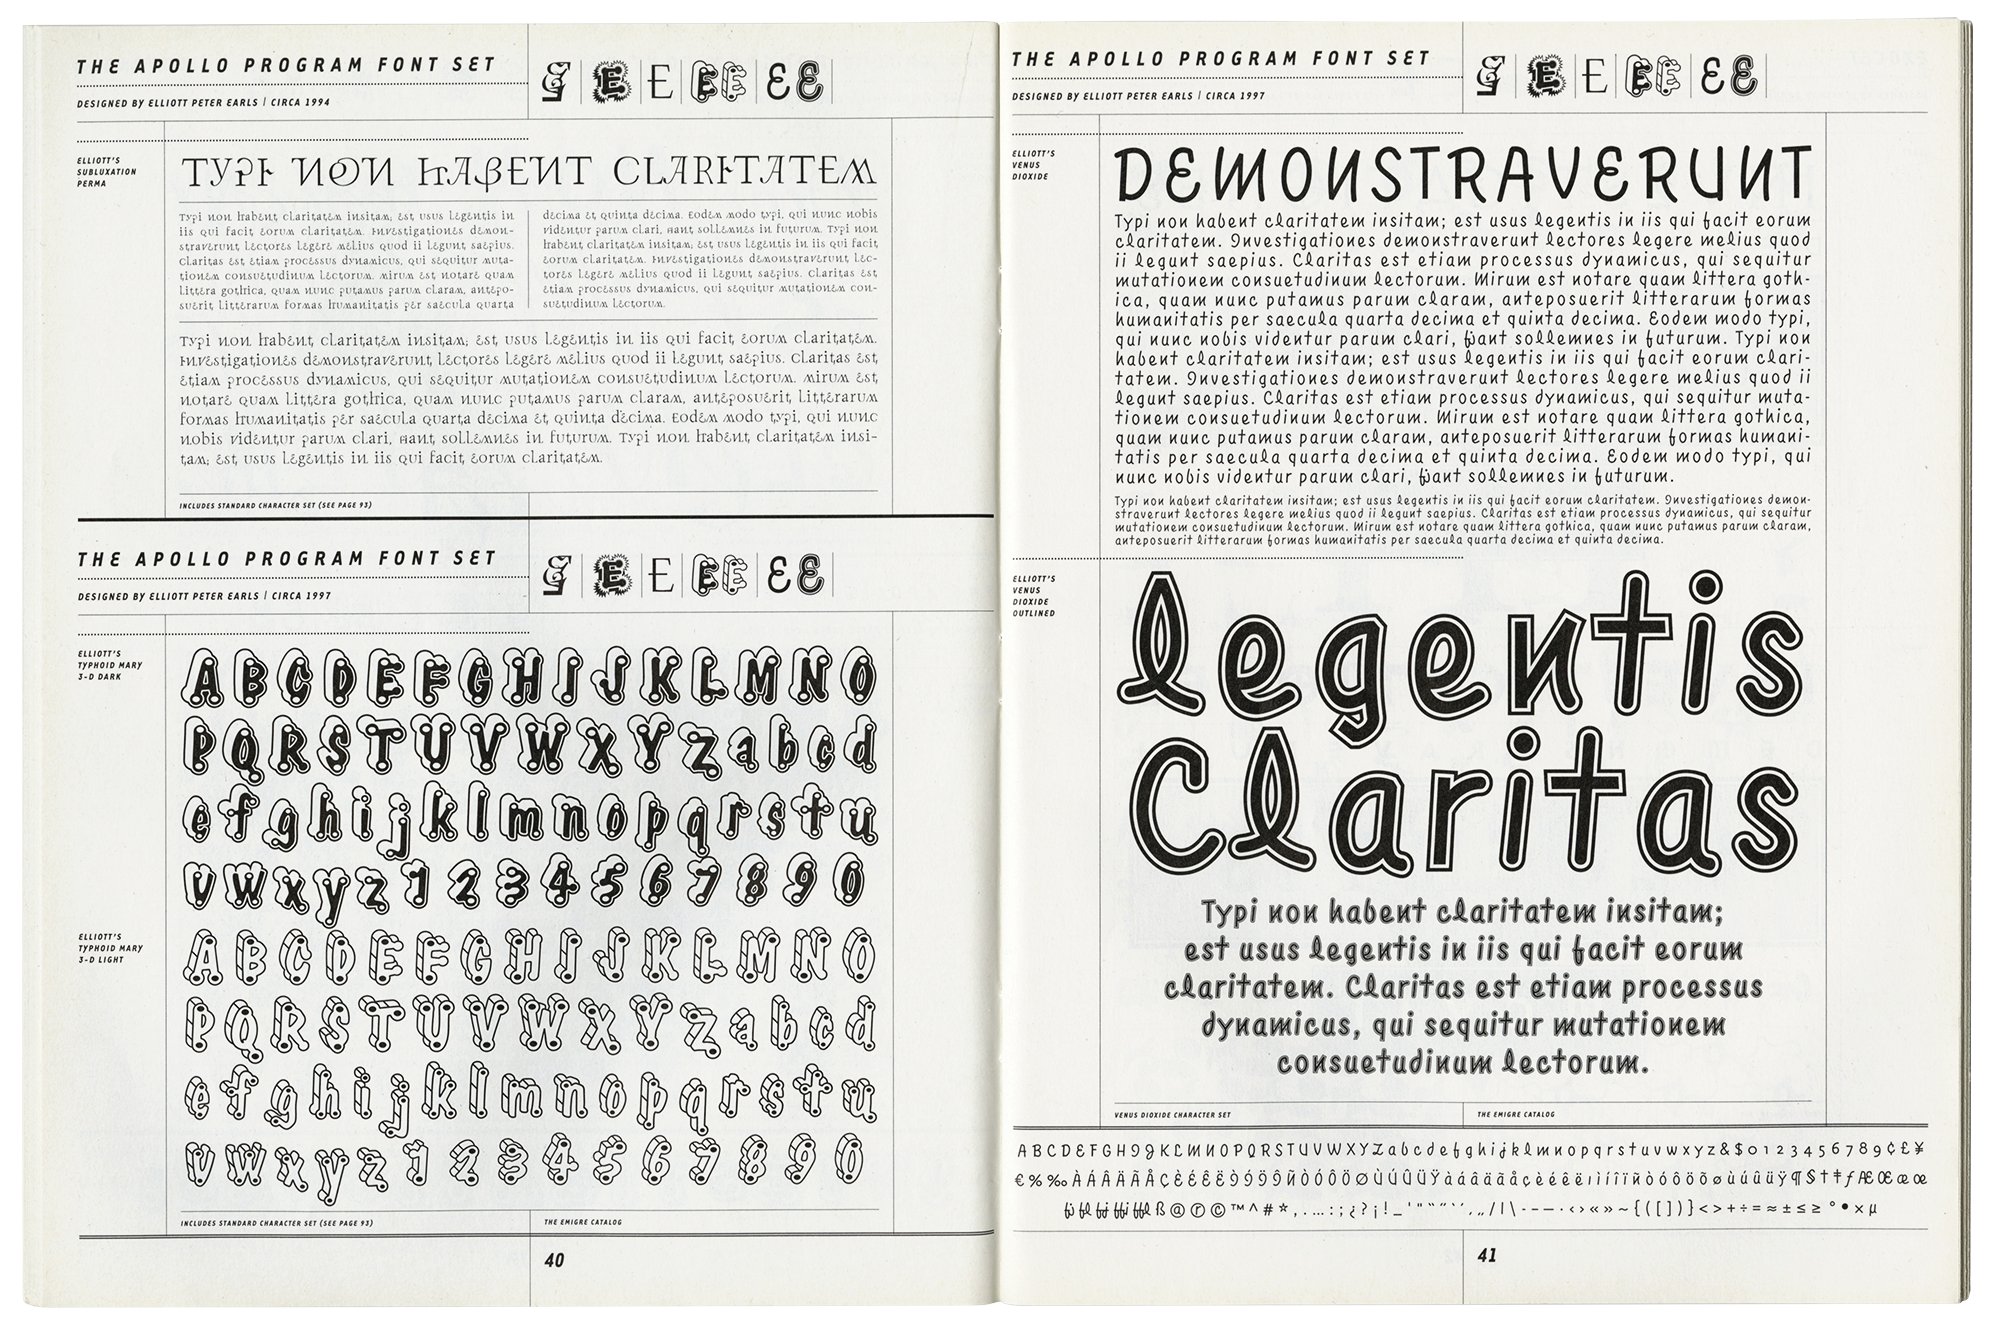 Letterform Archive The Apollo Program Font Set By Elliott Peter Earls As Seen In The Emigre Catalog Emigre Inc Sacramento 00 If You Re Into Wild Font Sets Check Out Our